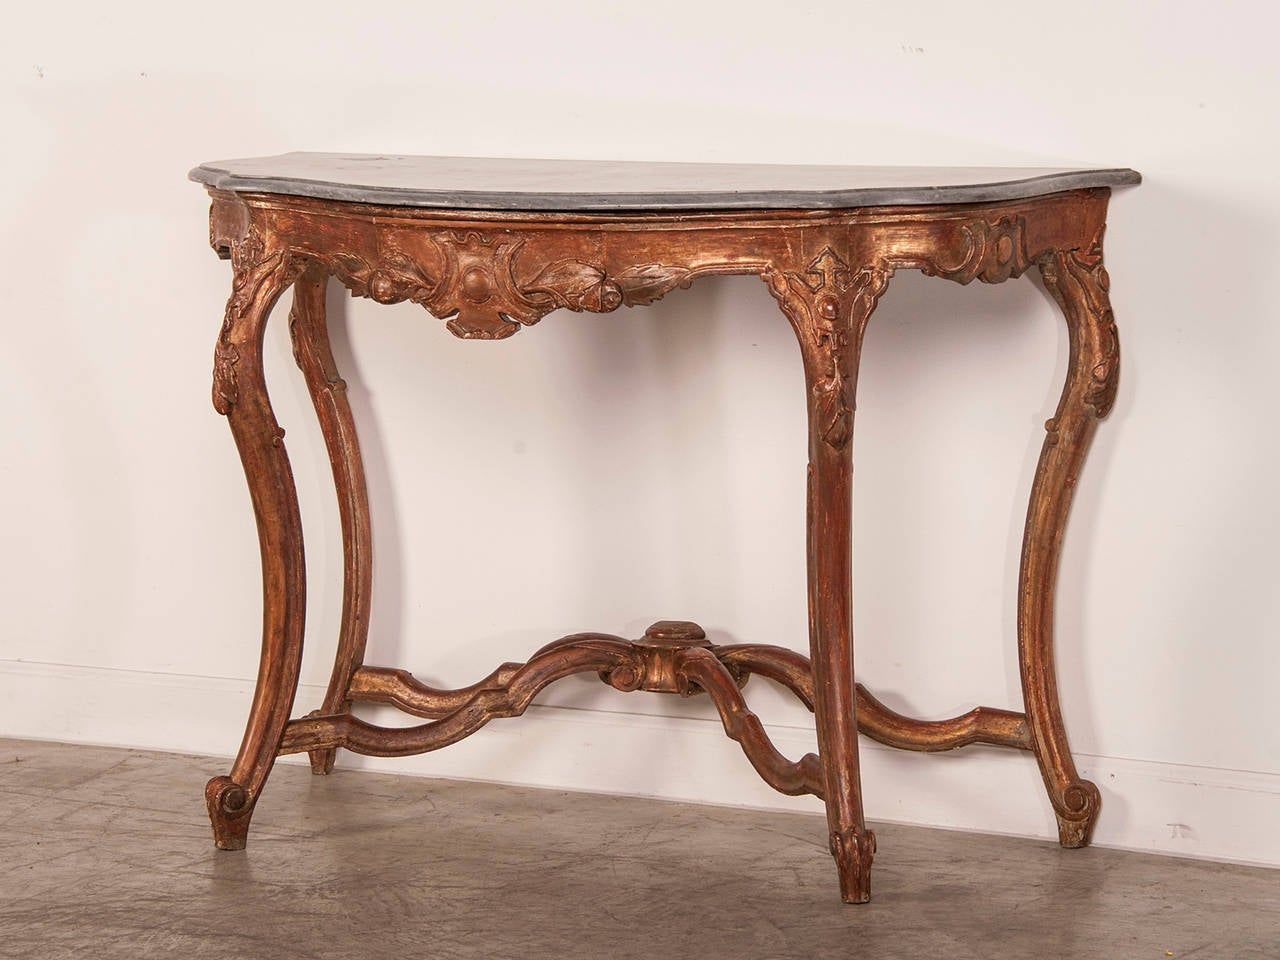 Antique French Louis Xv Gold Leaf Console Table, Original Marble Top Inside Antique Console Tables (View 5 of 20)